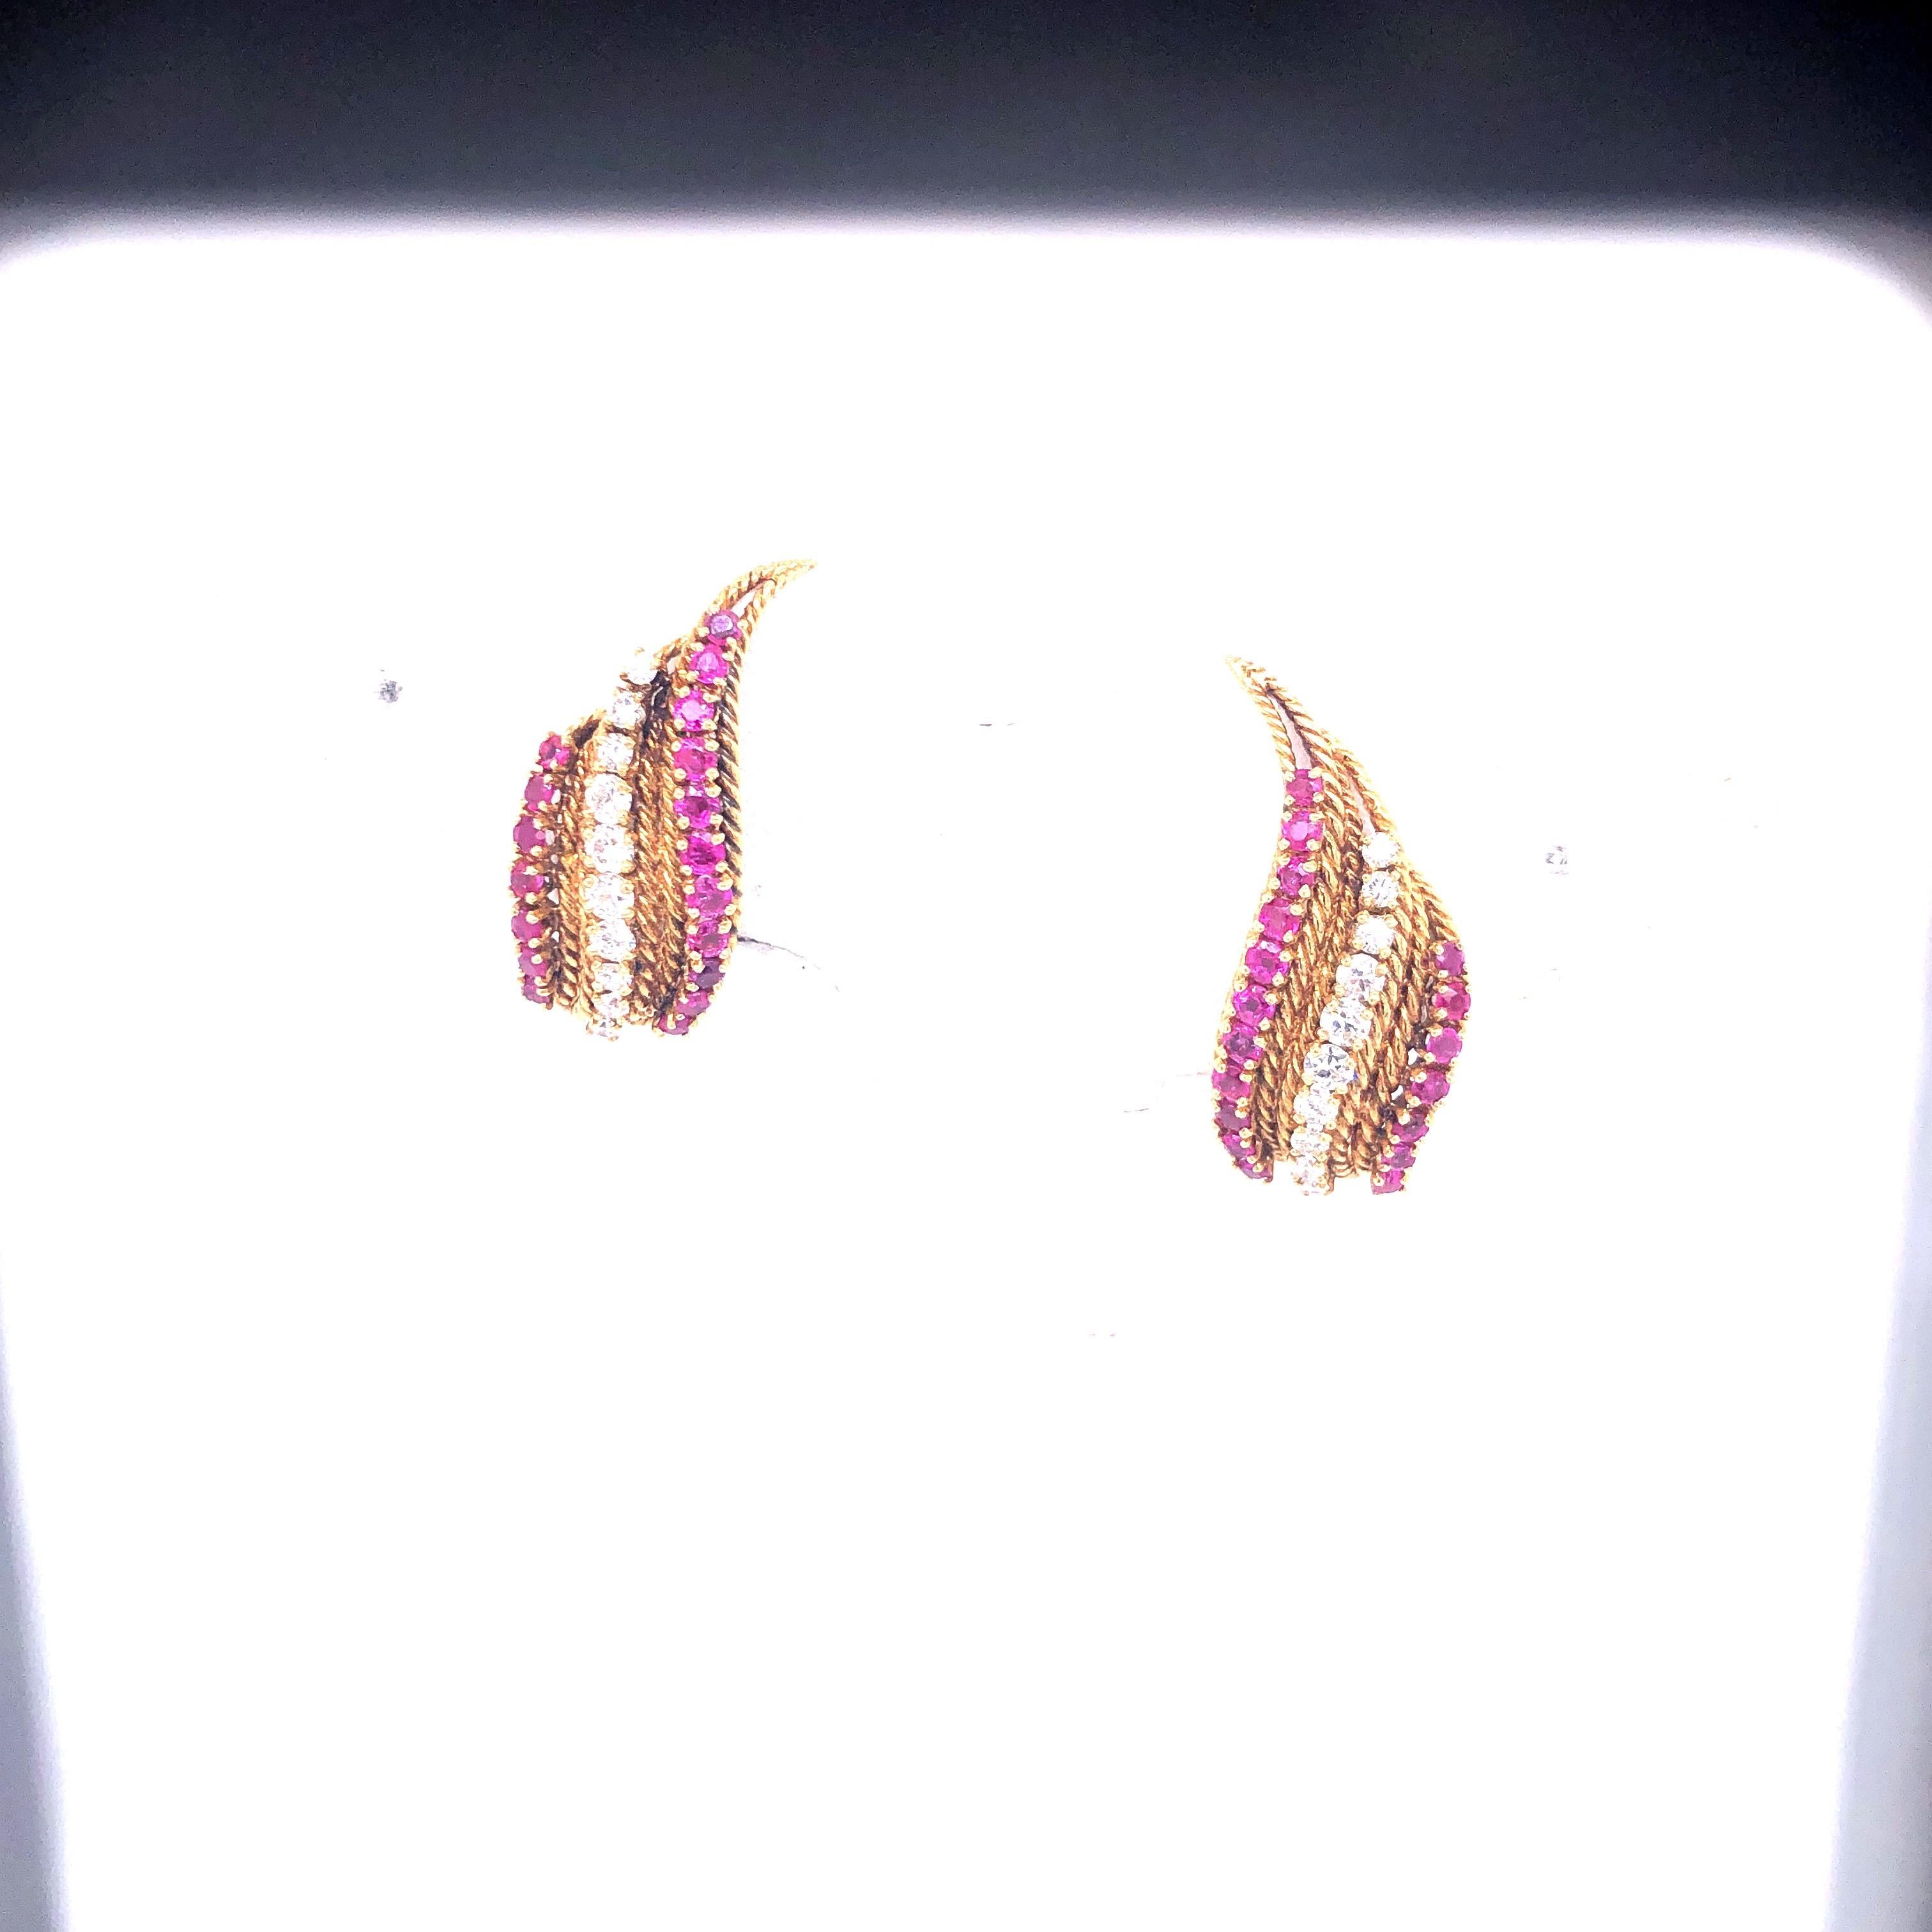 Stunning Yellow Gold Ruby and Diamond Earrings originally purchased at Neiman Marcus.  Stamped Neiman Marcus and Made in France.